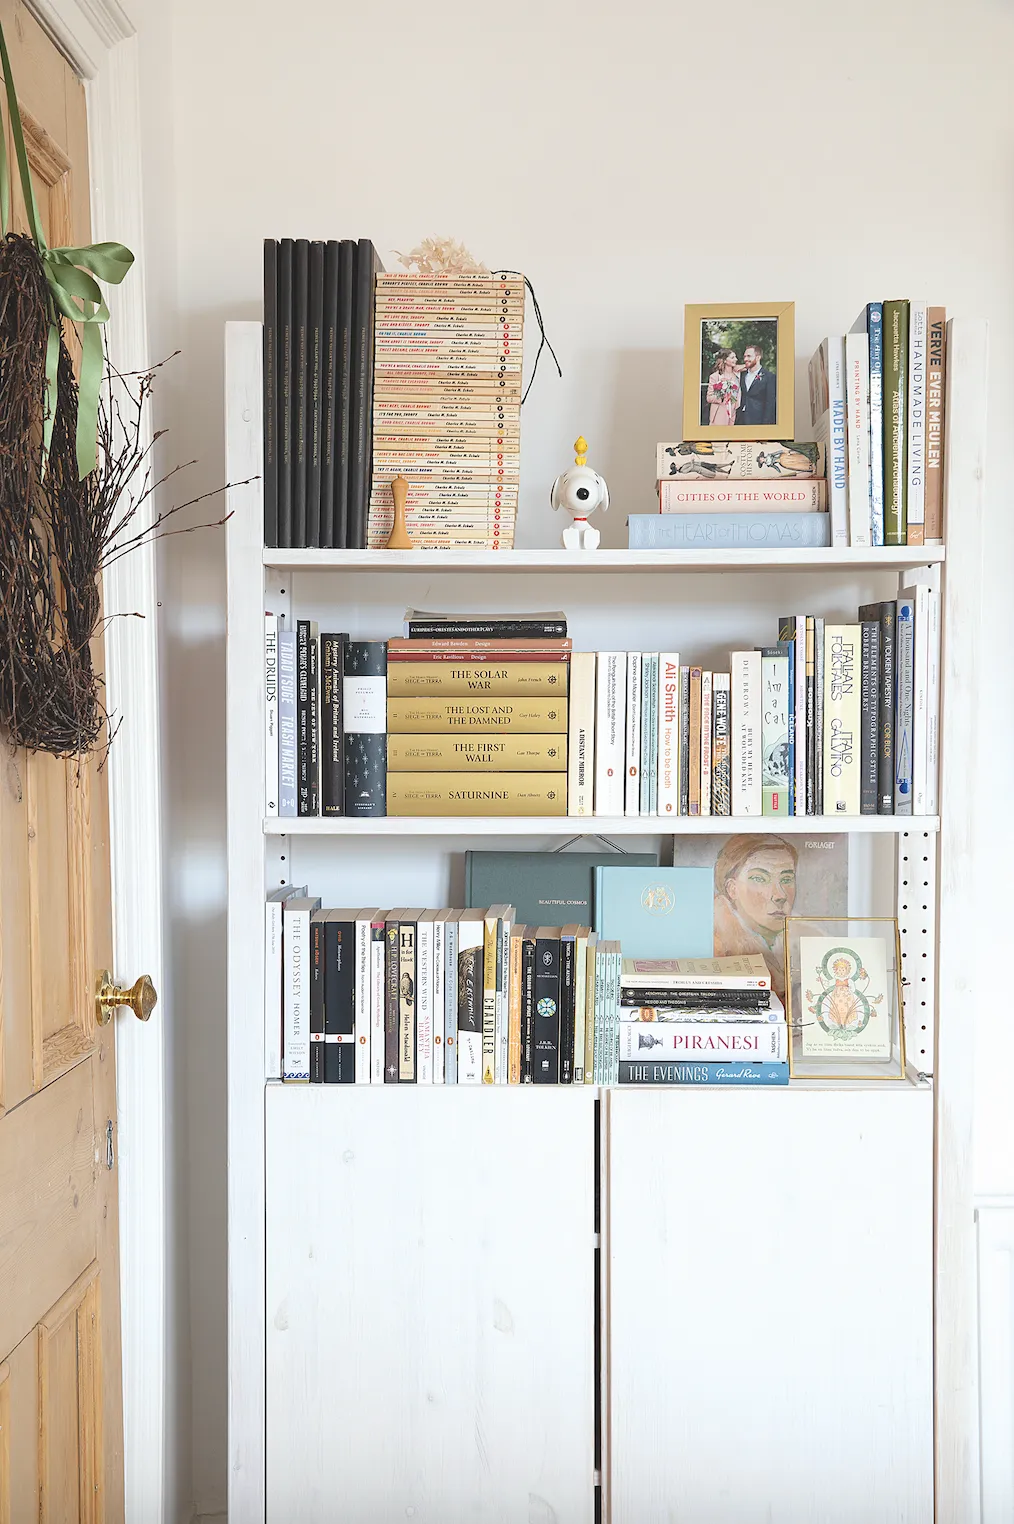 'This inexpensive IKEA Ivar bookcase is perfect for ever-changing displays. It’s been whitewashed so you can still see the grain, as there was so much wood in here already’